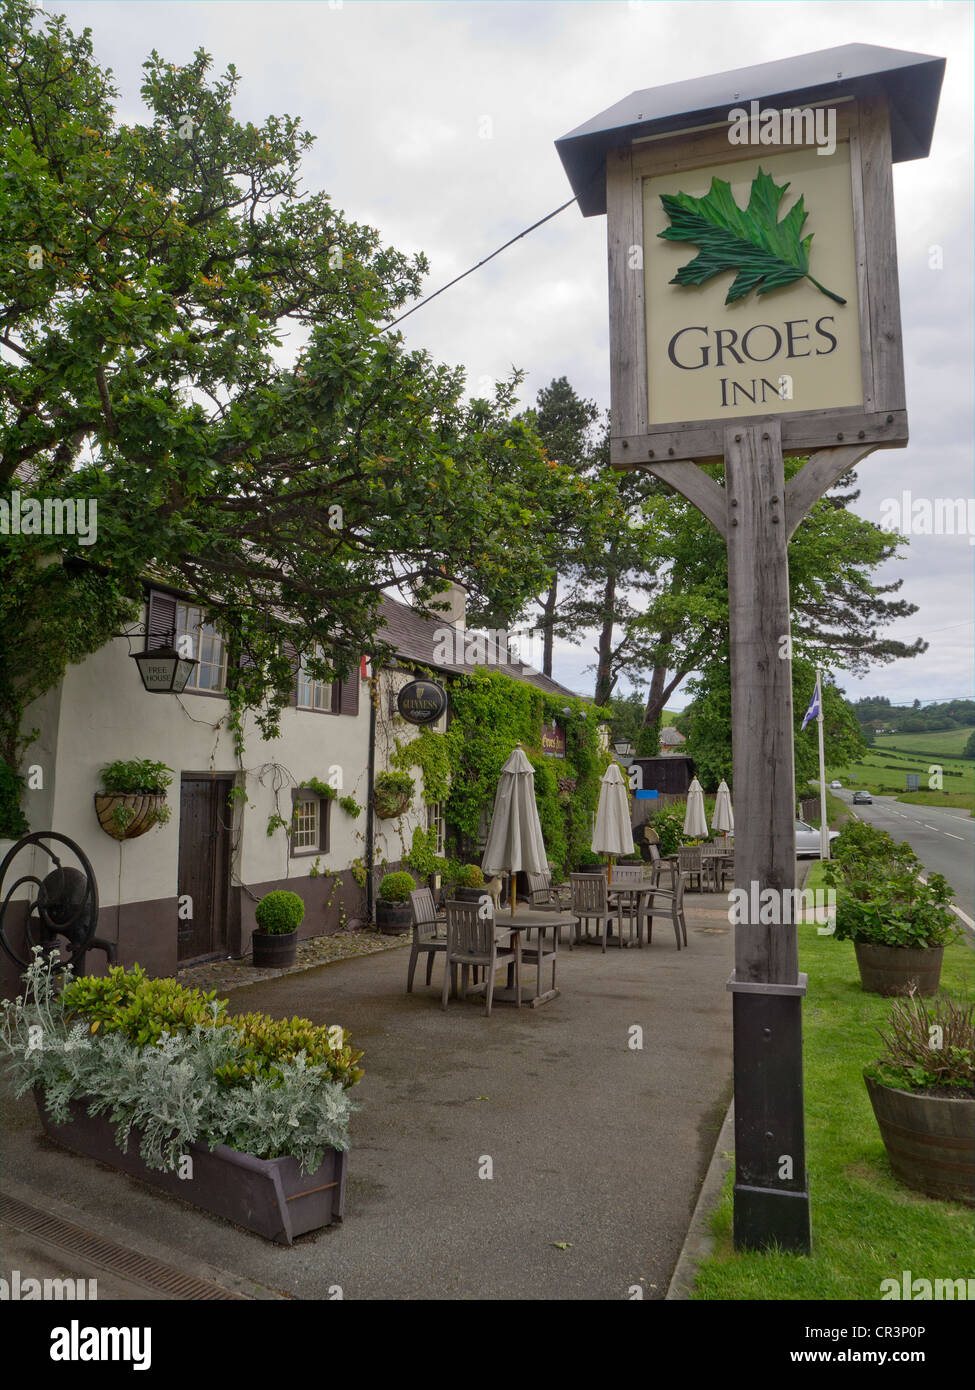 Award Winning Groes Inn near Conwy North Wales dating from 1573 Stock Photo